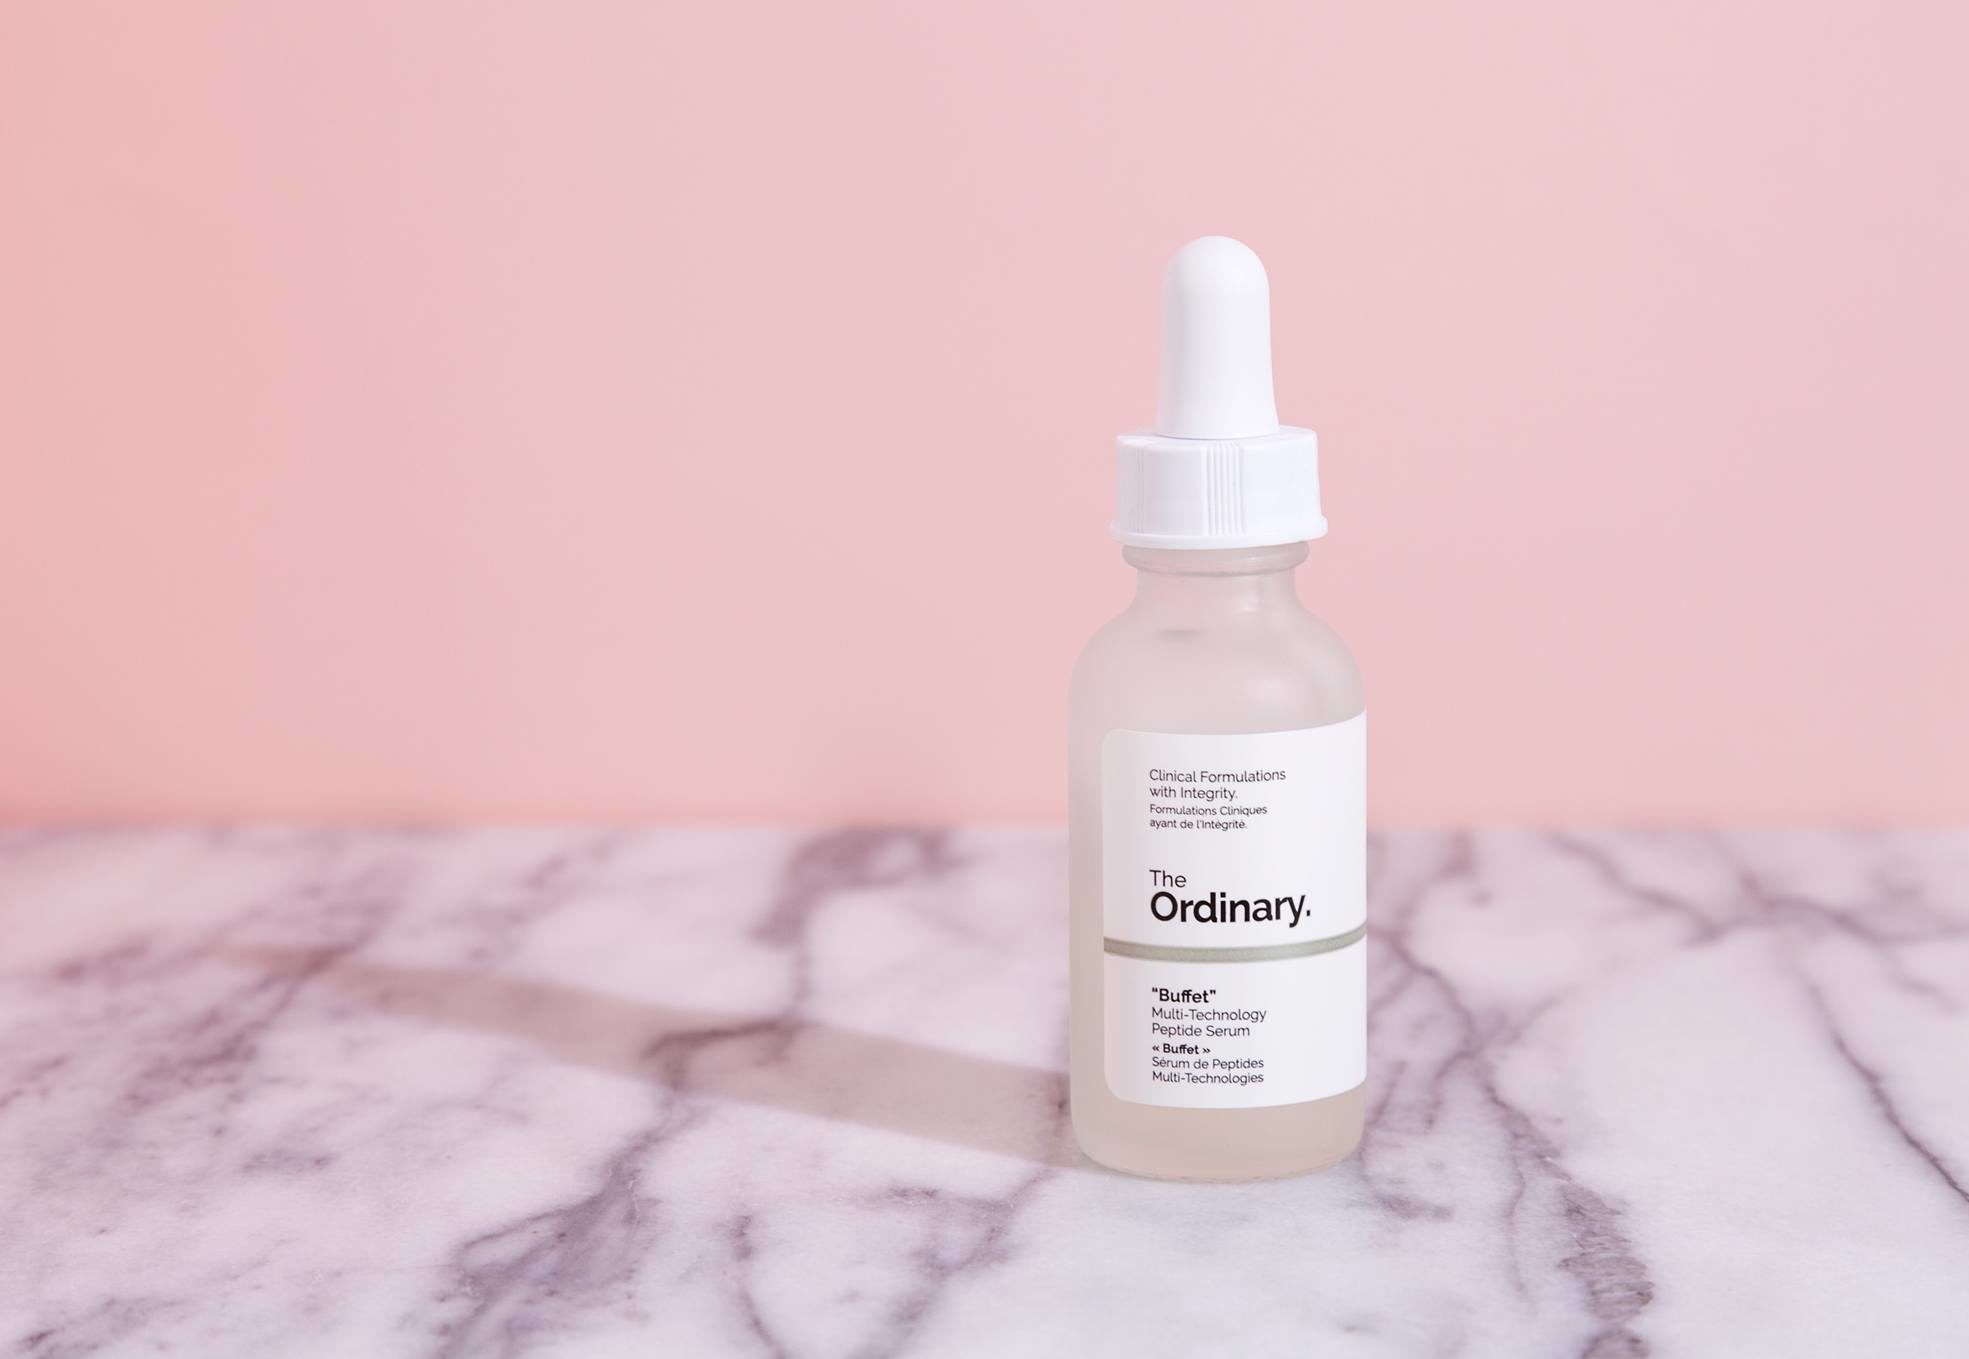 Product Review: The Ordinary “Buffet”